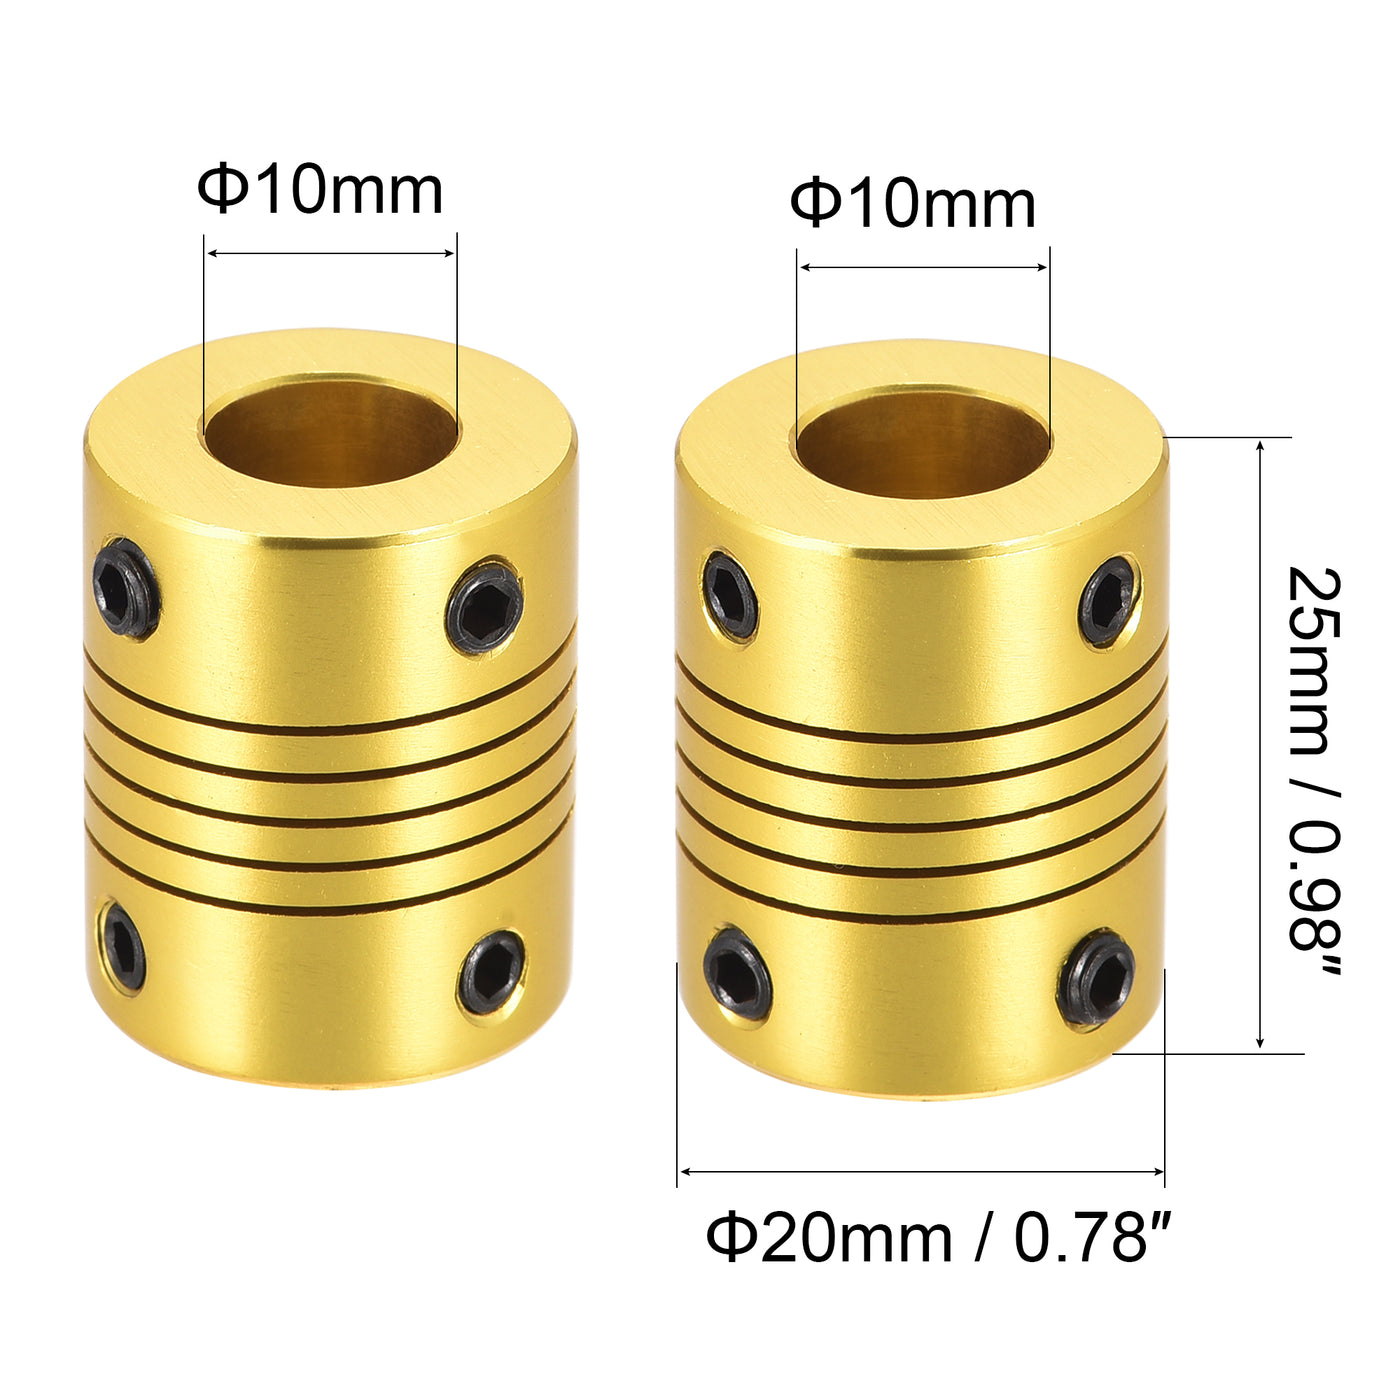 uxcell Uxcell 10mm to 10mm Aluminum Alloy Shaft Coupling Flexible Coupler L25xD20 Golden Tone